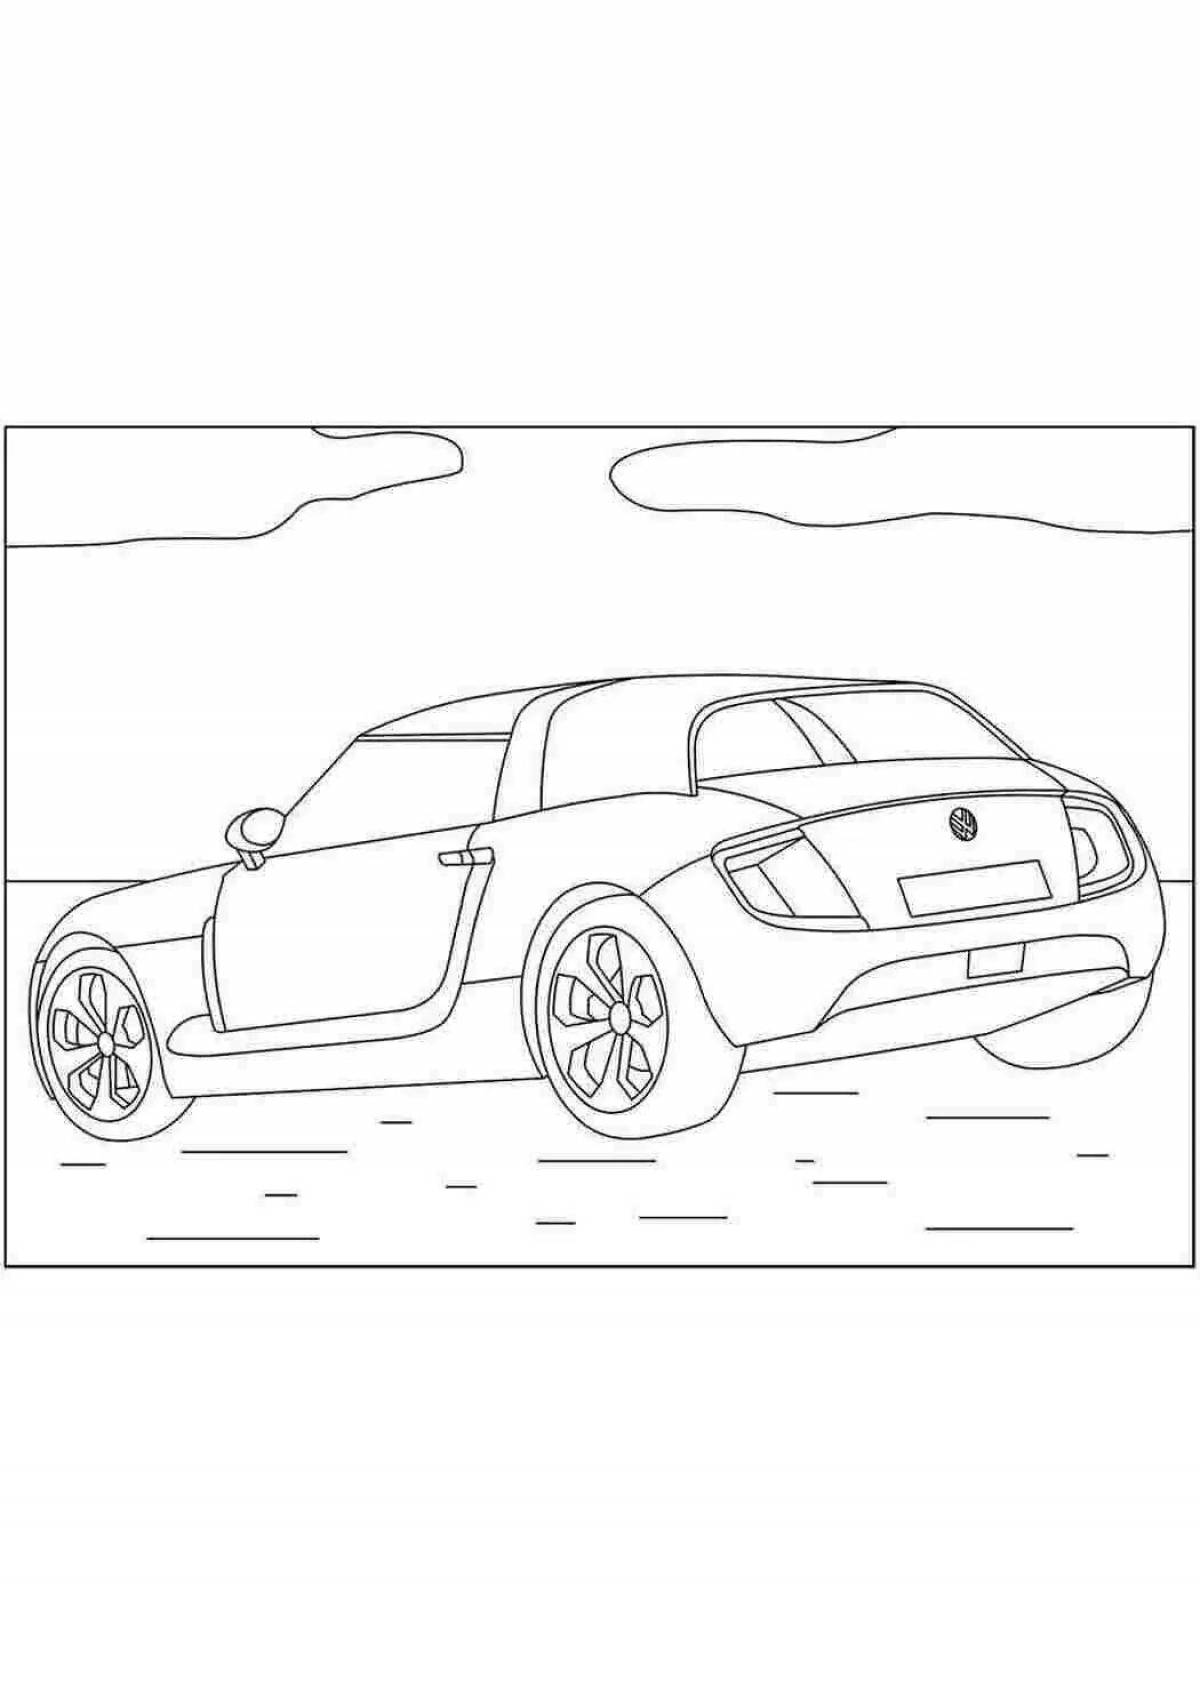 Colourful volkswagen car coloring page